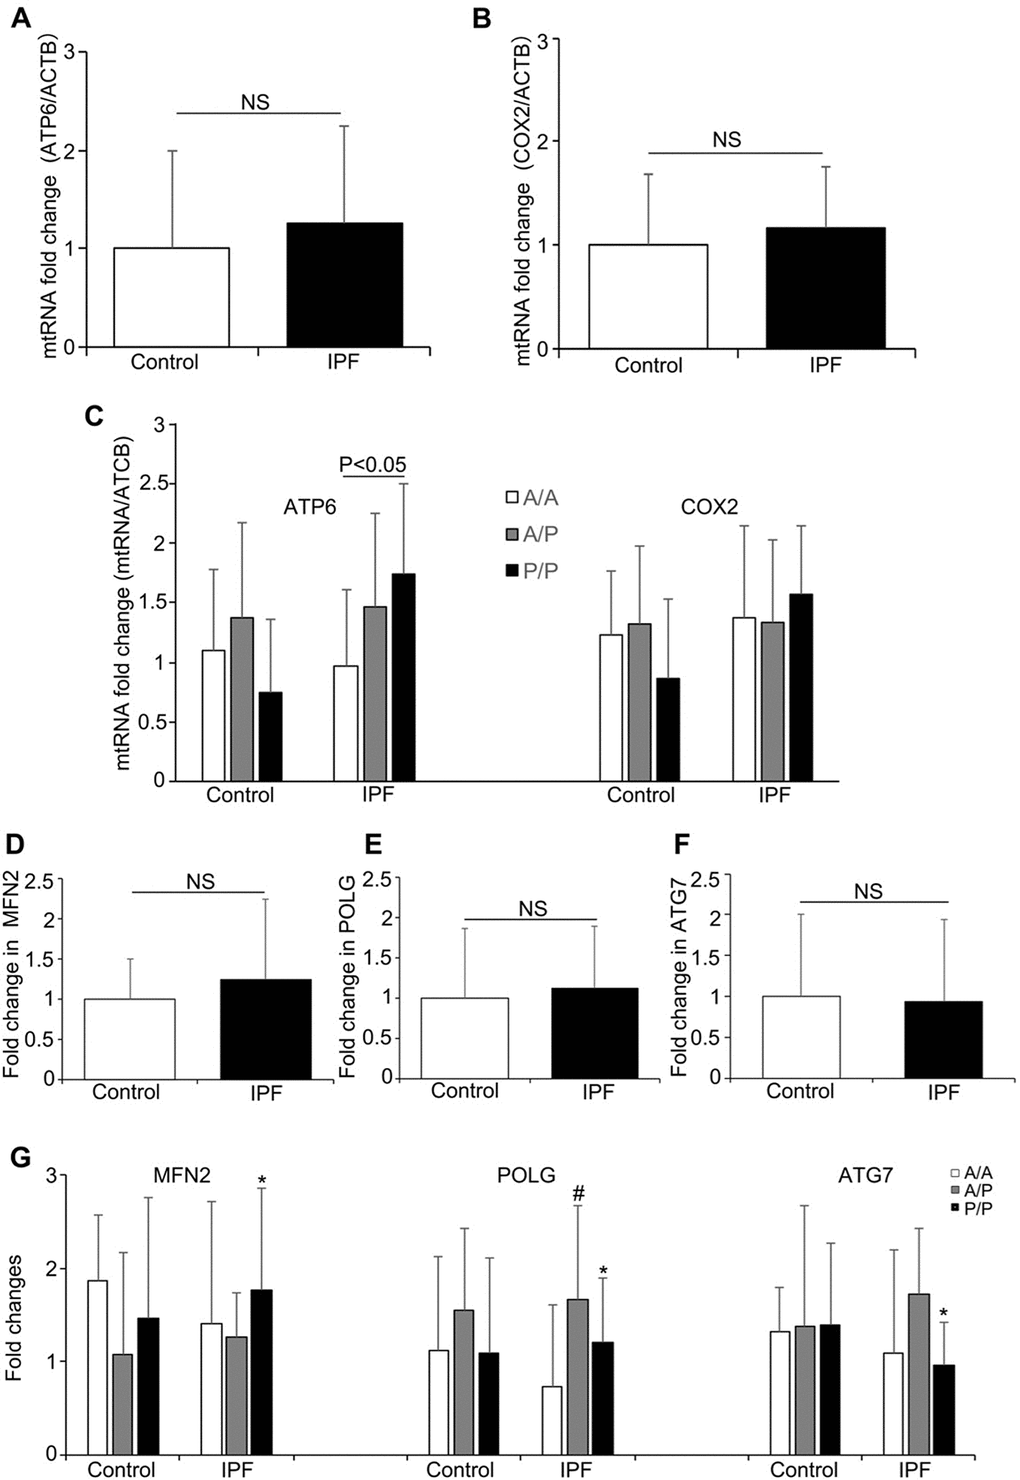 The mRNA levels of mitochondrial genes and mitochondrial regulation-related genes in the IPF patients and healthy controls. (A) ATP6 and (B) COX2 mRNA expression in the IPF patients and healthy controls. (C) The ATP6 and COX2 expression levels in the patients and healthy controls with different AluYb8MUTYH genotypes. (D–F) MFN2, POLG and ATG7 expression in the patients and healthy controls. (G) The MFN2, POLG and ATG7 mRNA levels among the IPF patients and healthy controls with different AluYb8MUTYH genotypes. * A significant difference between IPF patients with the A/P and P/P genotypes, PA/A and A/P genotypes, P